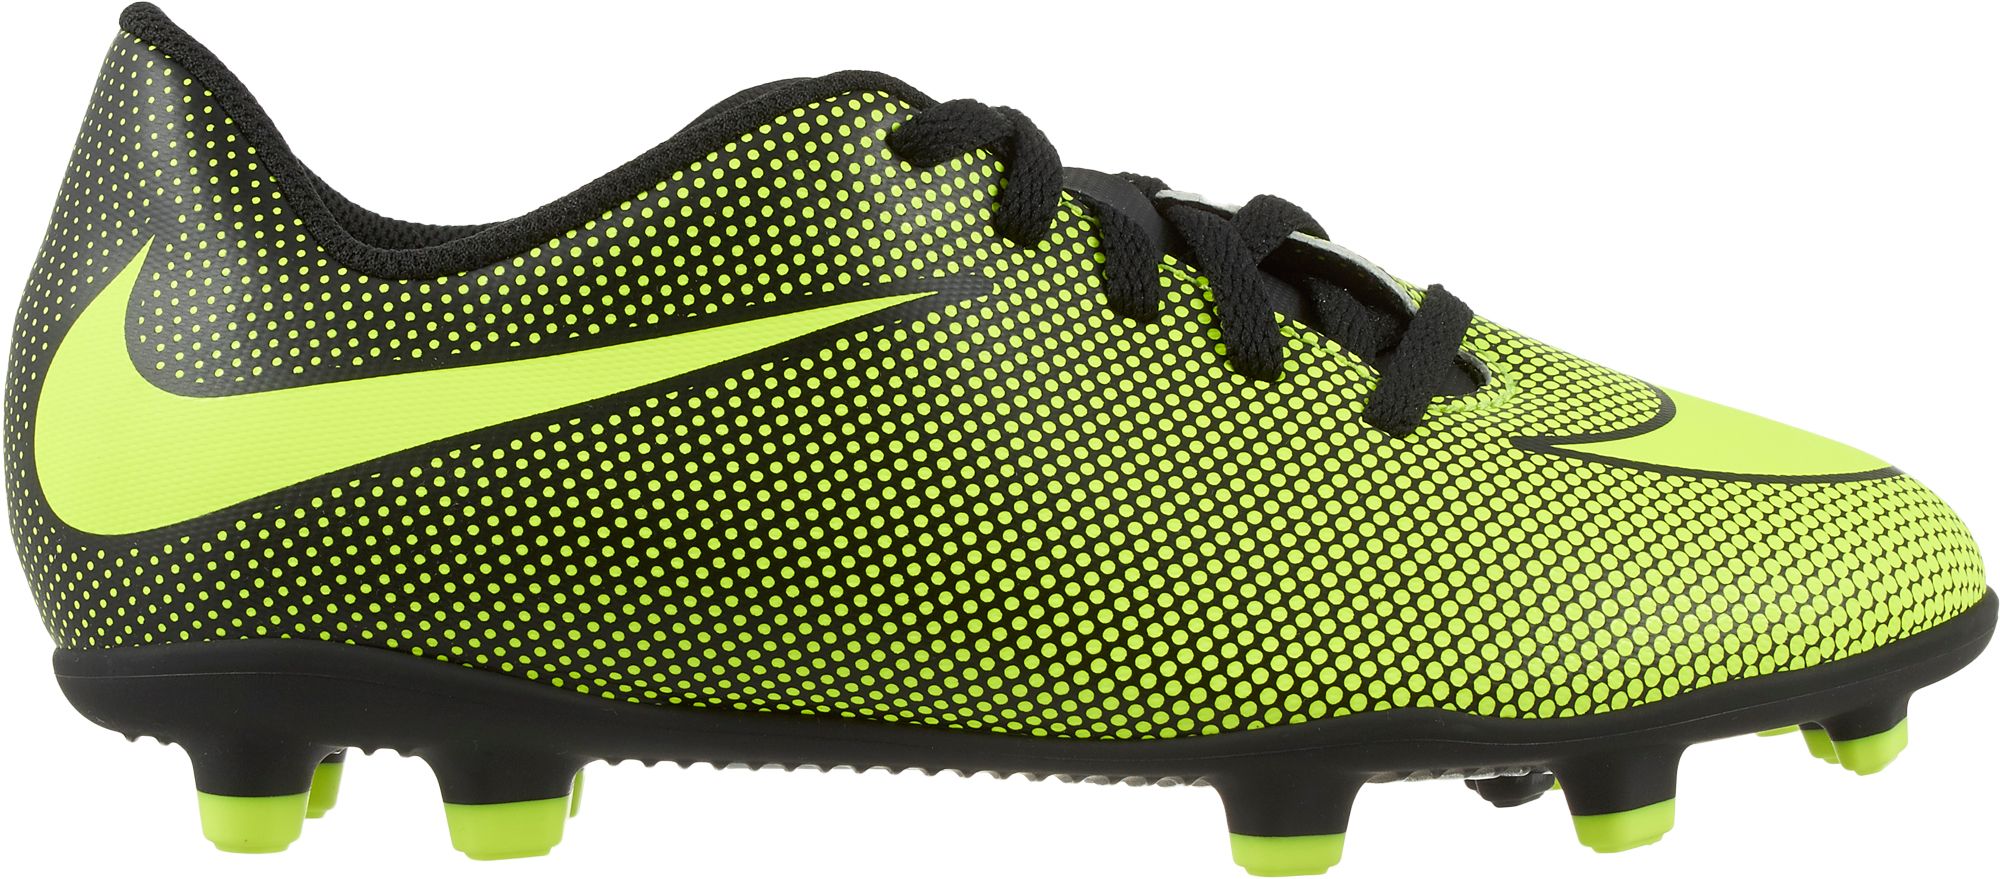 soccer shoes for kid